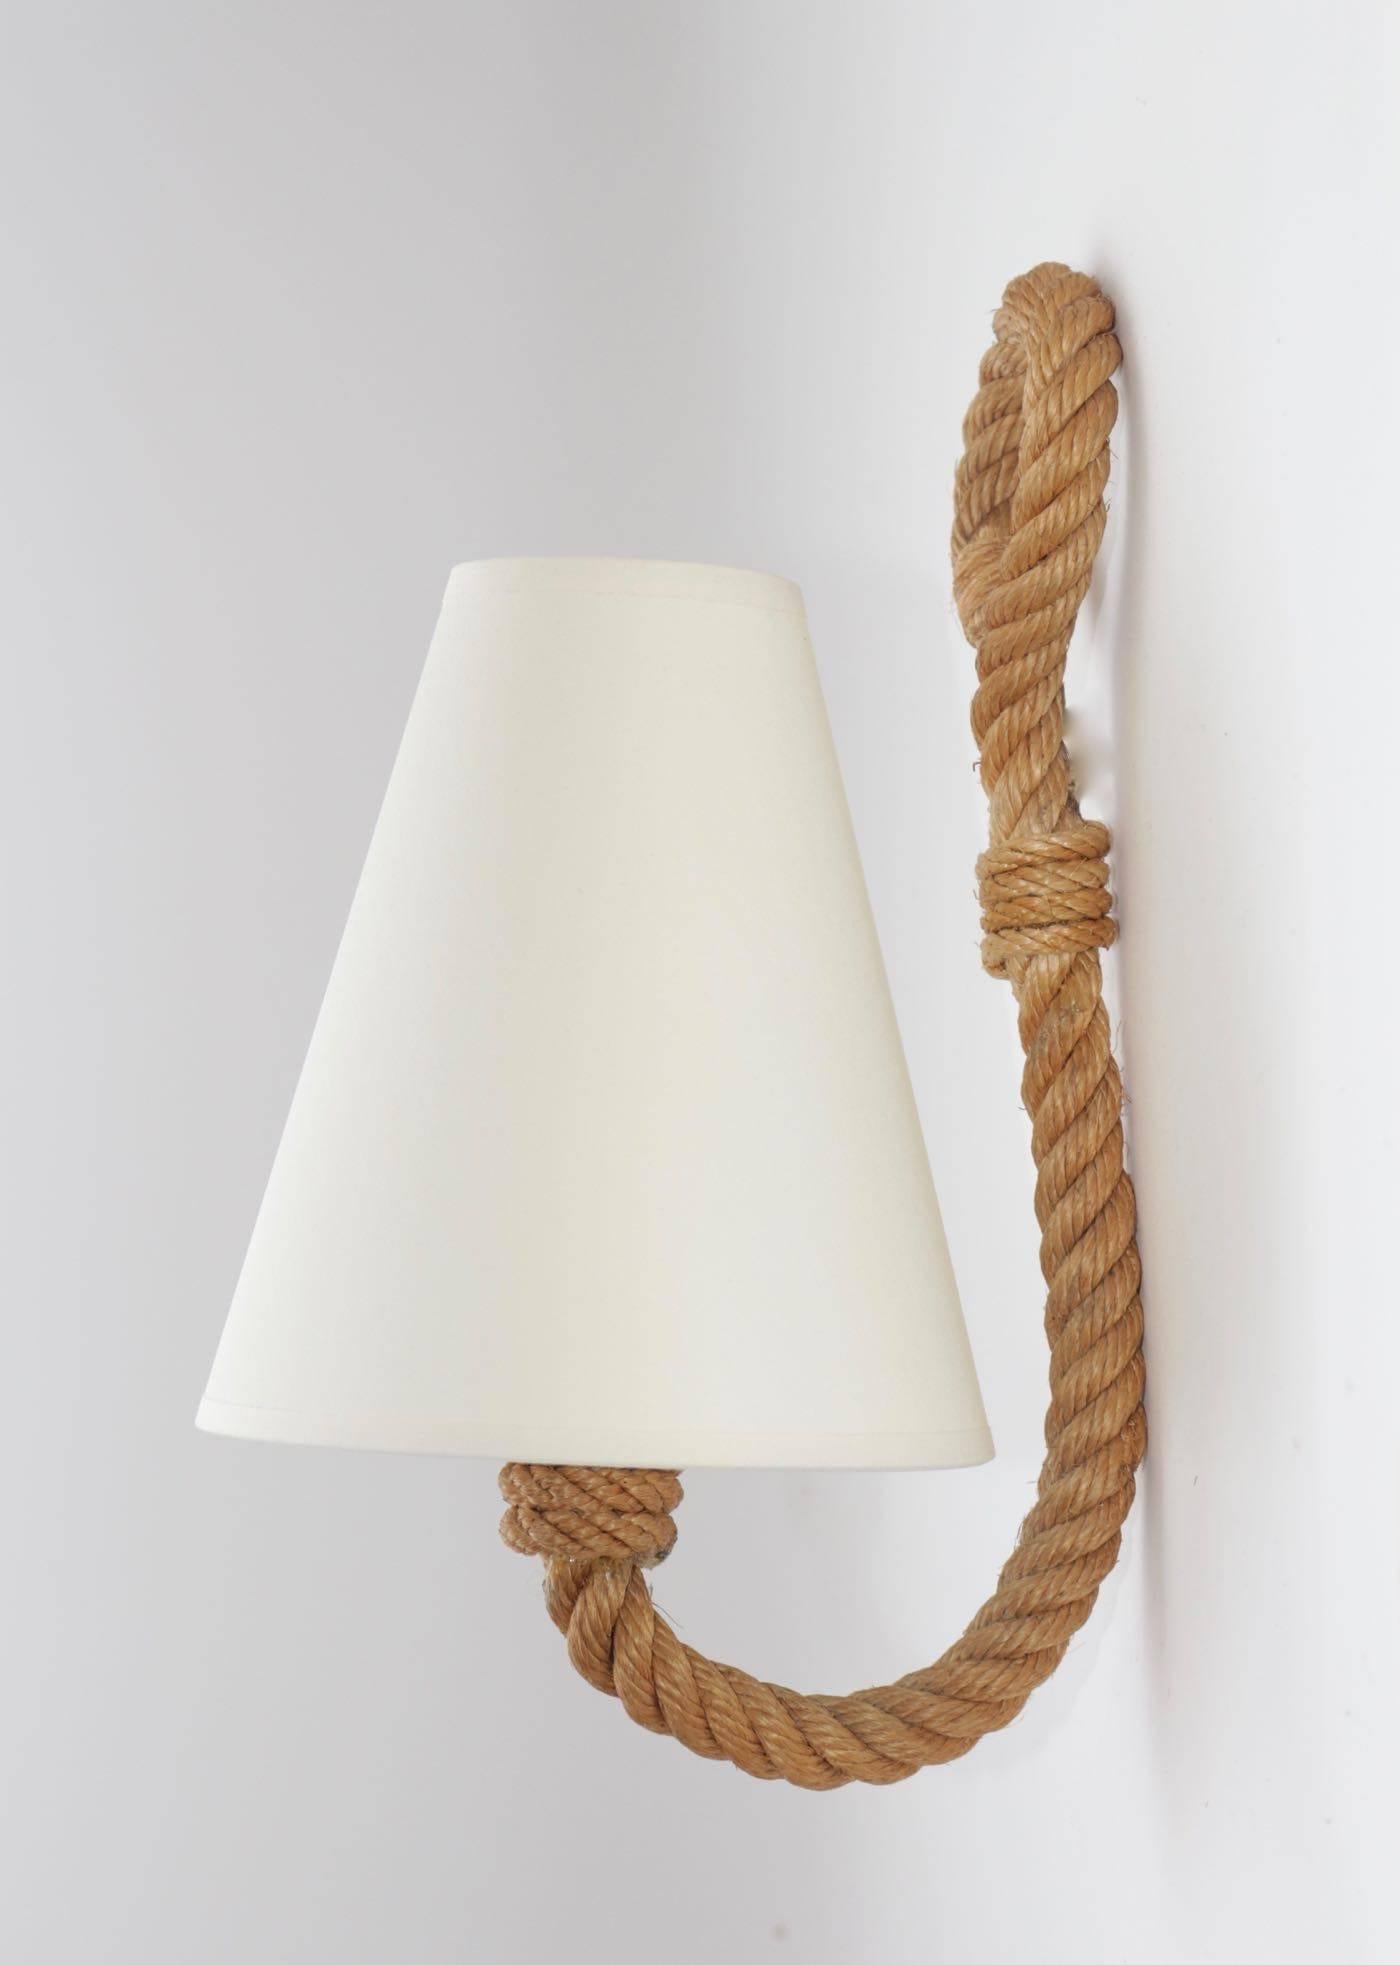 1950s pair of Adrien Audoux and Frida Minet. 

Each sconce consists of one lighted arm made of rope ended with handcrafted lampshade in off-white cotton.

One bulb per sconce.
Can be wire to the US standards.
Adrien Audoux and Frida Minet are known